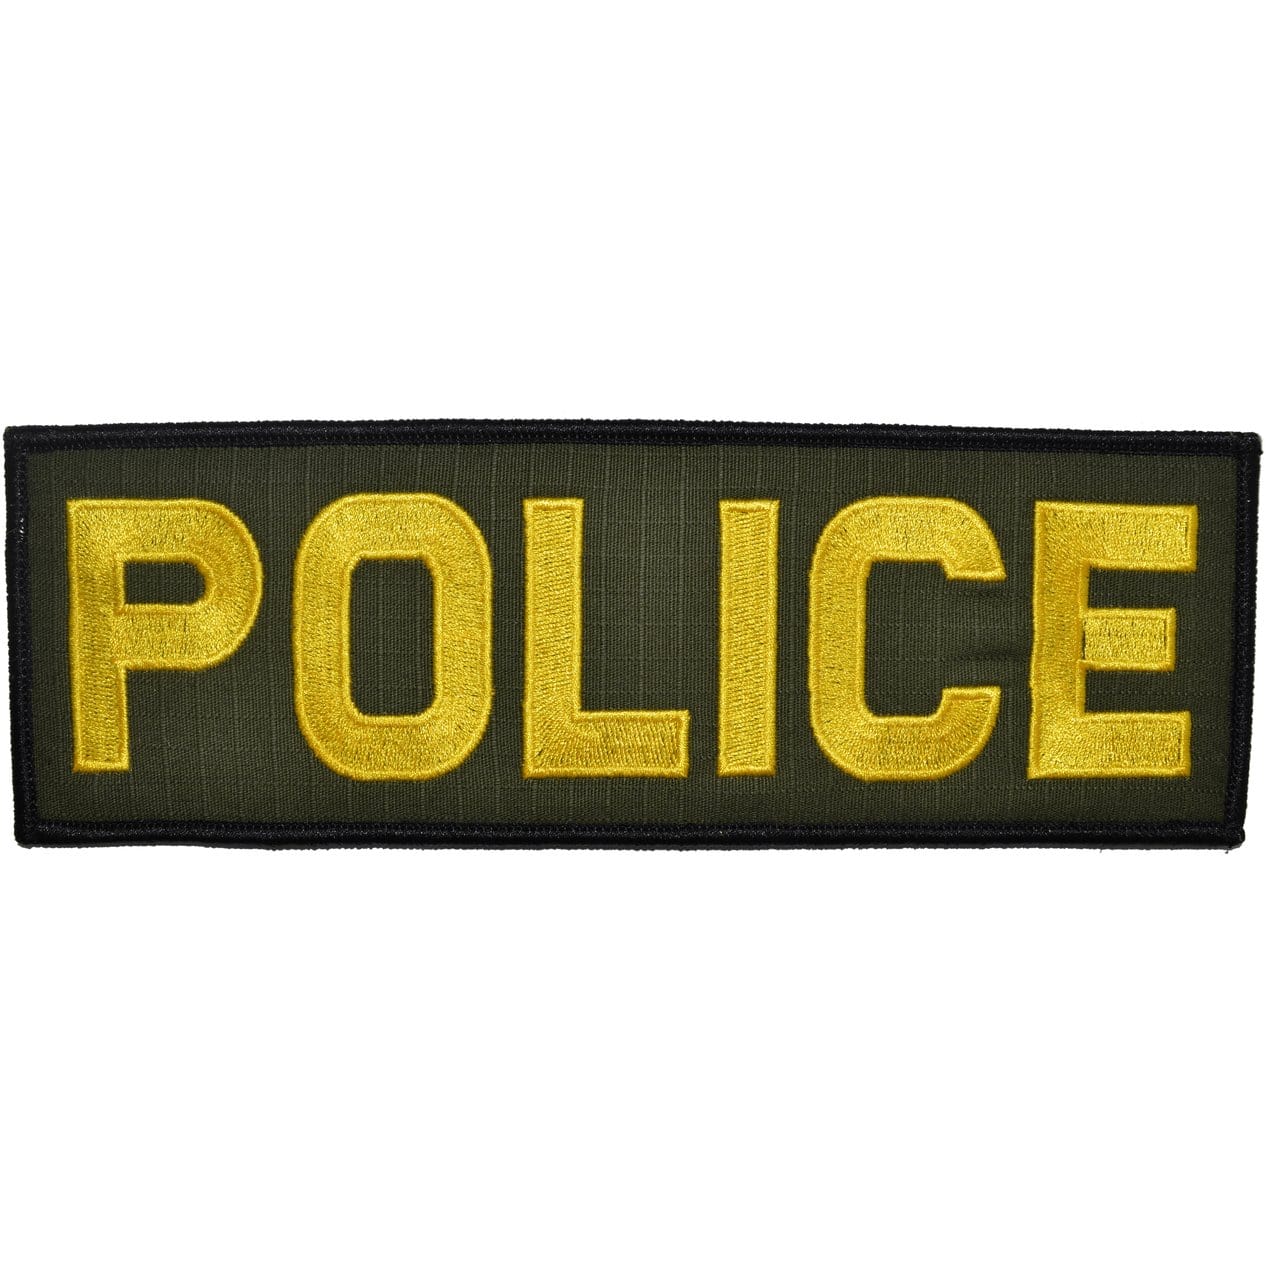 Tactical Gear Junkie Patches Olive Drab w/ Yellow POLICE - 3x9 Patch